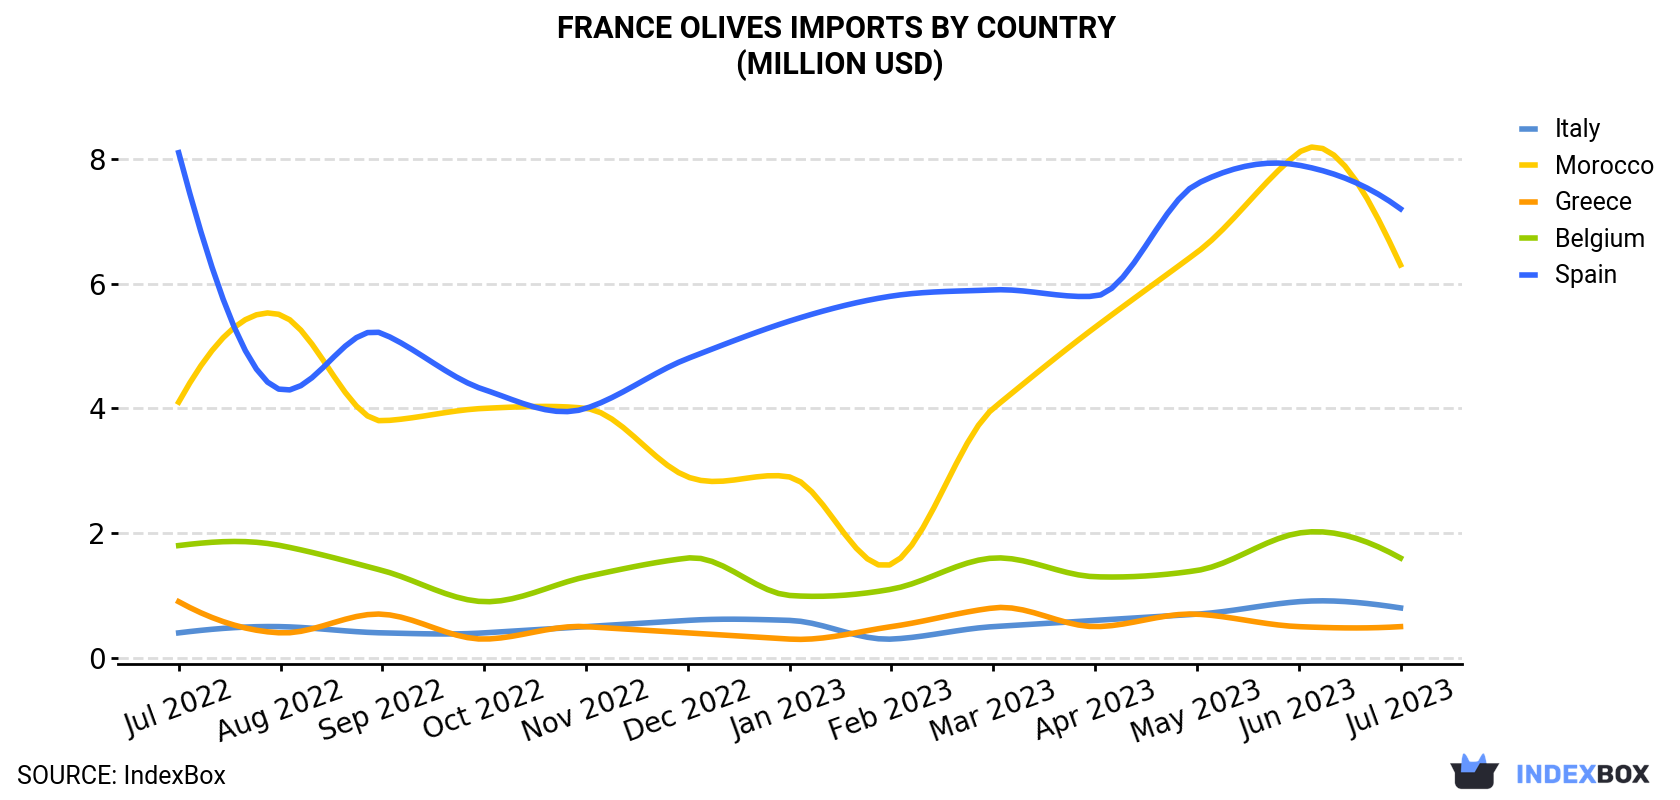 France Olives Imports By Country (Million USD)